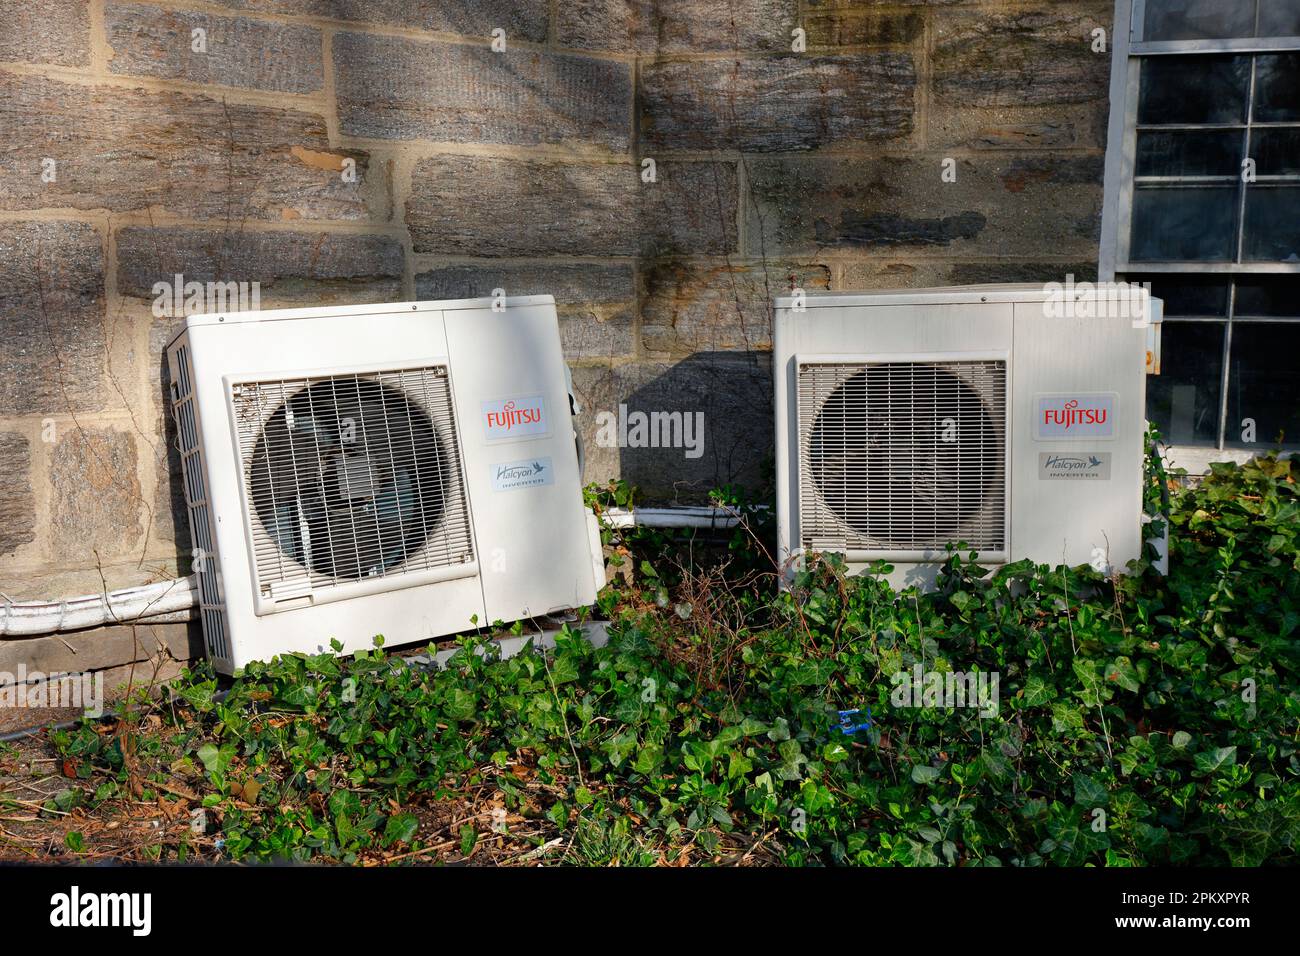 Fujitsu Halcyon inverter heat pumps by the side of a stone building in a field of english ivy. split unit air conditioners. Stock Photo